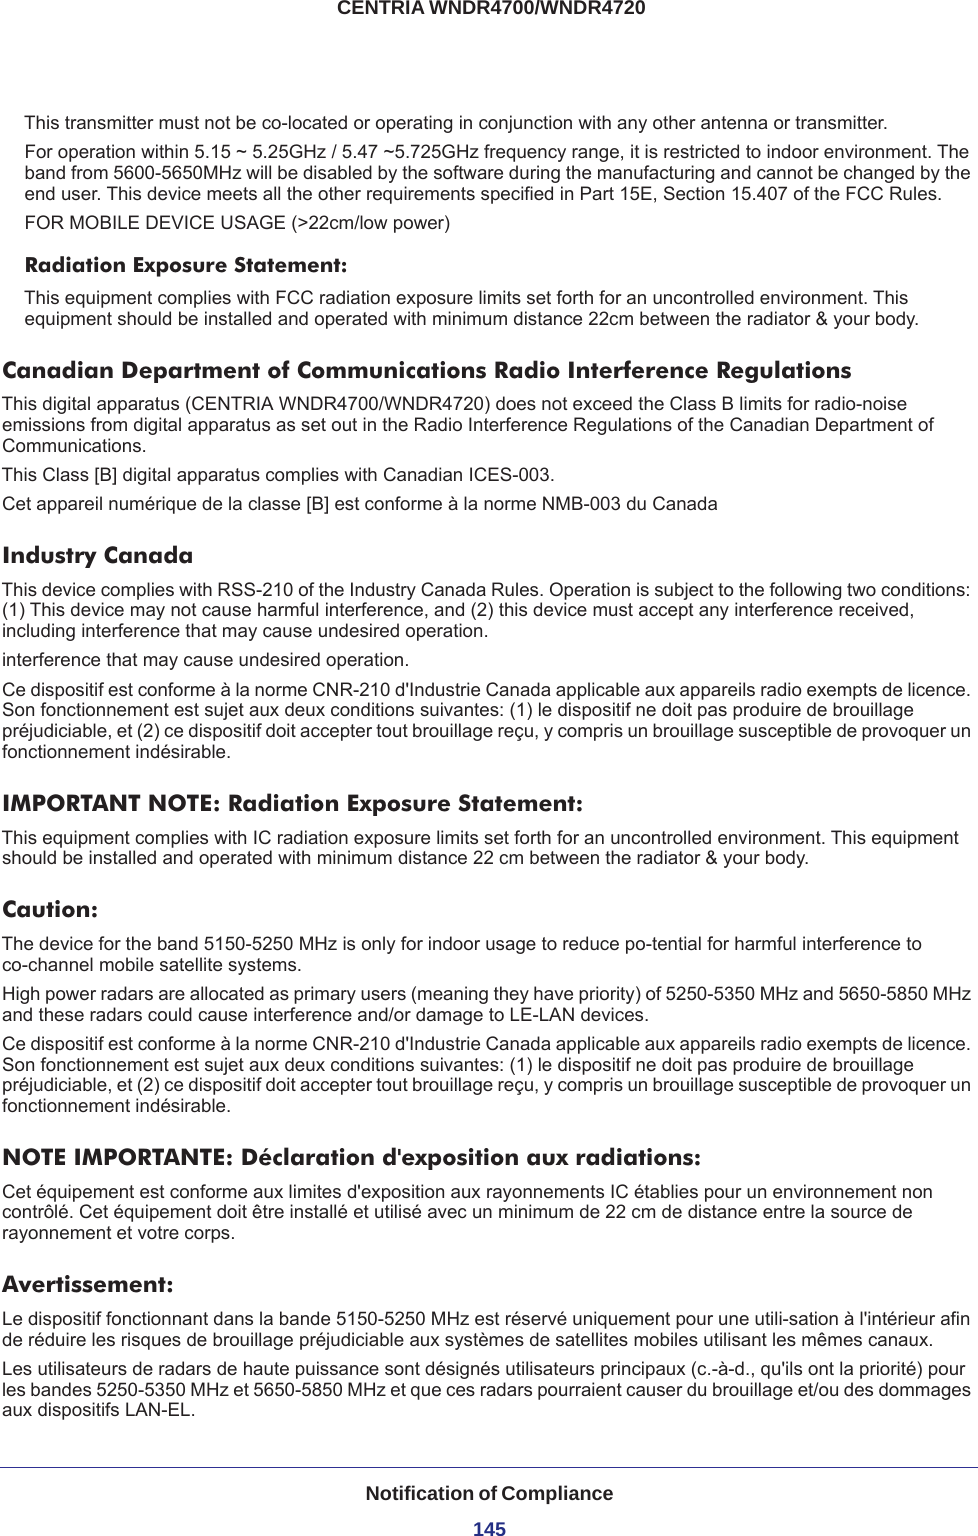 Notification of Compliance145 CENTRIA WNDR4700/WNDR4720This transmitter must not be co-located or operating in conjunction with any other antenna or transmitter.For operation within 5.15 ~ 5.25GHz / 5.47 ~5.725GHz frequency range, it is restricted to indoor environment. The band from 5600-5650MHz will be disabled by the software during the manufacturing and cannot be changed by the end user. This device meets all the other requirements specified in Part 15E, Section 15.407 of the FCC Rules.FOR MOBILE DEVICE USAGE (&gt;22cm/low power)Radiation Exposure Statement:This equipment complies with FCC radiation exposure limits set forth for an uncontrolled environment. This equipment should be installed and operated with minimum distance 22cm between the radiator &amp; your body.Canadian Department of Communications Radio Interference RegulationsThis digital apparatus (CENTRIA WNDR4700/WNDR4720) does not exceed the Class B limits for radio-noise emissions from digital apparatus as set out in the Radio Interference Regulations of the Canadian Department of Communications.This Class [B] digital apparatus complies with Canadian ICES-003.Cet appareil numérique de la classe [B] est conforme à la norme NMB-003 du CanadaIndustry CanadaThis device complies with RSS-210 of the Industry Canada Rules. Operation is subject to the following two conditions: (1) This device may not cause harmful interference, and (2) this device must accept any interference received, including interference that may cause undesired operation.interference that may cause undesired operation.Ce dispositif est conforme à la norme CNR-210 d&apos;Industrie Canada applicable aux appareils radio exempts de licence. Son fonctionnement est sujet aux deux conditions suivantes: (1) le dispositif ne doit pas produire de brouillage préjudiciable, et (2) ce dispositif doit accepter tout brouillage reçu, y compris un brouillage susceptible de provoquer un fonctionnement indésirable. IMPORTANT NOTE: Radiation Exposure Statement:This equipment complies with IC radiation exposure limits set forth for an uncontrolled environment. This equipment should be installed and operated with minimum distance 22 cm between the radiator &amp; your body.Caution:The device for the band 5150-5250 MHz is only for indoor usage to reduce po-tential for harmful interference to co-channel mobile satellite systems. High power radars are allocated as primary users (meaning they have priority) of 5250-5350 MHz and 5650-5850 MHz and these radars could cause interference and/or damage to LE-LAN devices. Ce dispositif est conforme à la norme CNR-210 d&apos;Industrie Canada applicable aux appareils radio exempts de licence. Son fonctionnement est sujet aux deux conditions suivantes: (1) le dispositif ne doit pas produire de brouillage préjudiciable, et (2) ce dispositif doit accepter tout brouillage reçu, y compris un brouillage susceptible de provoquer un fonctionnement indésirable.NOTE IMPORTANTE: Déclaration d&apos;exposition aux radiations:Cet équipement est conforme aux limites d&apos;exposition aux rayonnements IC établies pour un environnement non contrôlé. Cet équipement doit être installé et utilisé avec un minimum de 22 cm de distance entre la source de rayonnement et votre corps.Avertissement:Le dispositif fonctionnant dans la bande 5150-5250 MHz est réservé uniquement pour une utili-sation à l&apos;intérieur afin de réduire les risques de brouillage préjudiciable aux systèmes de satellites mobiles utilisant les mêmes canaux.Les utilisateurs de radars de haute puissance sont désignés utilisateurs principaux (c.-à-d., qu&apos;ils ont la priorité) pour les bandes 5250-5350 MHz et 5650-5850 MHz et que ces radars pourraient causer du brouillage et/ou des dommages aux dispositifs LAN-EL.